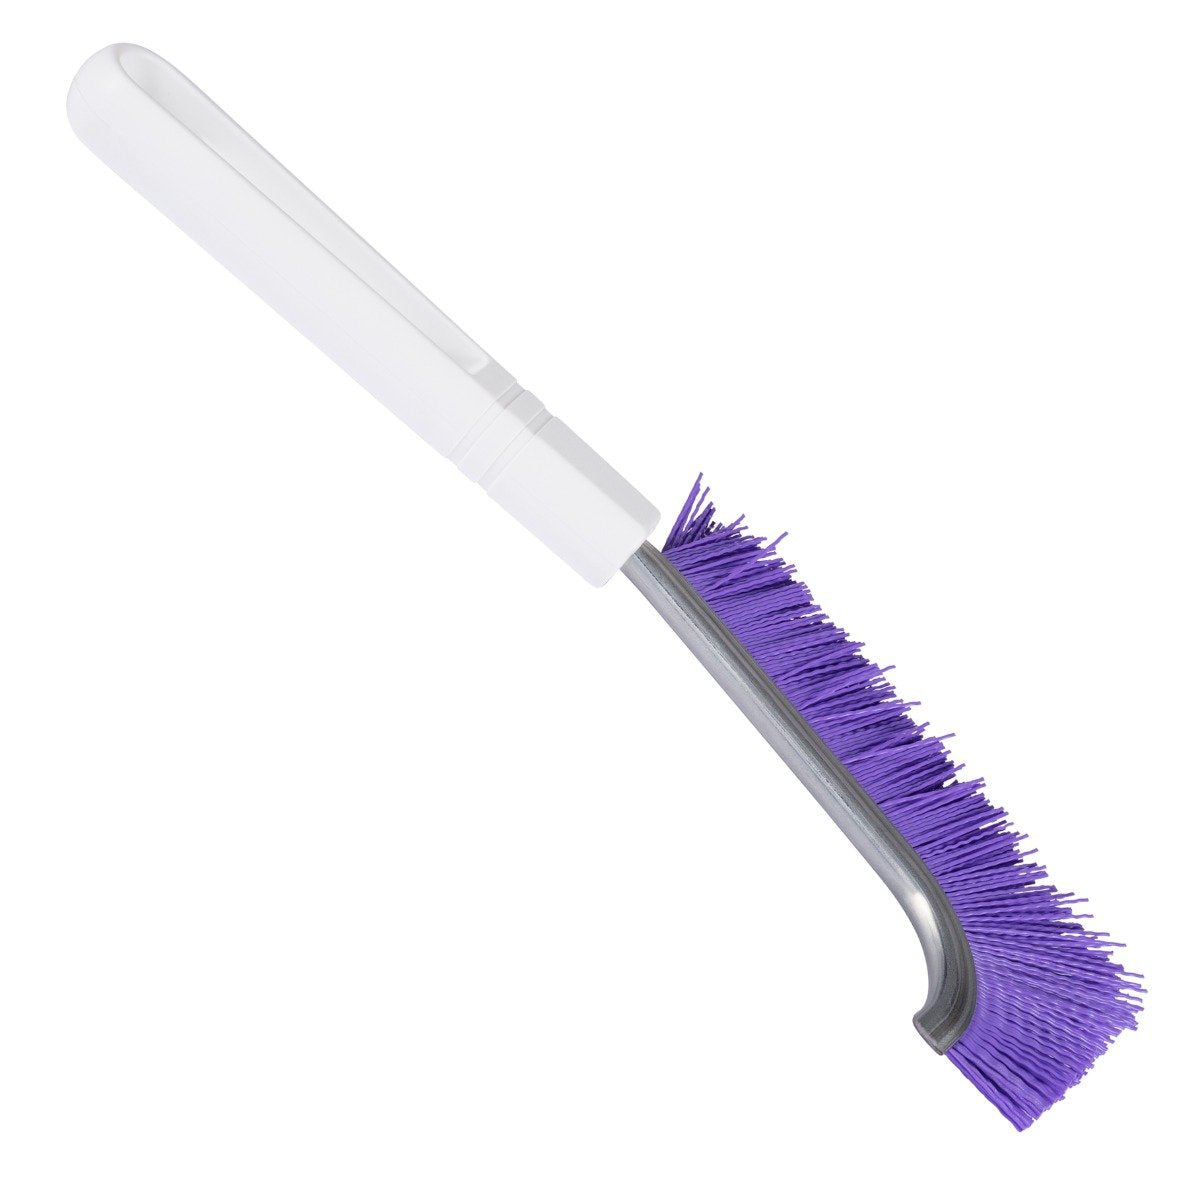 Shower Track And Grout Heavy Duty Scrub Brush w/ Comfort Grip & Stiff Bristles Purple-Cleaning Brushes-Fuller Brush Company